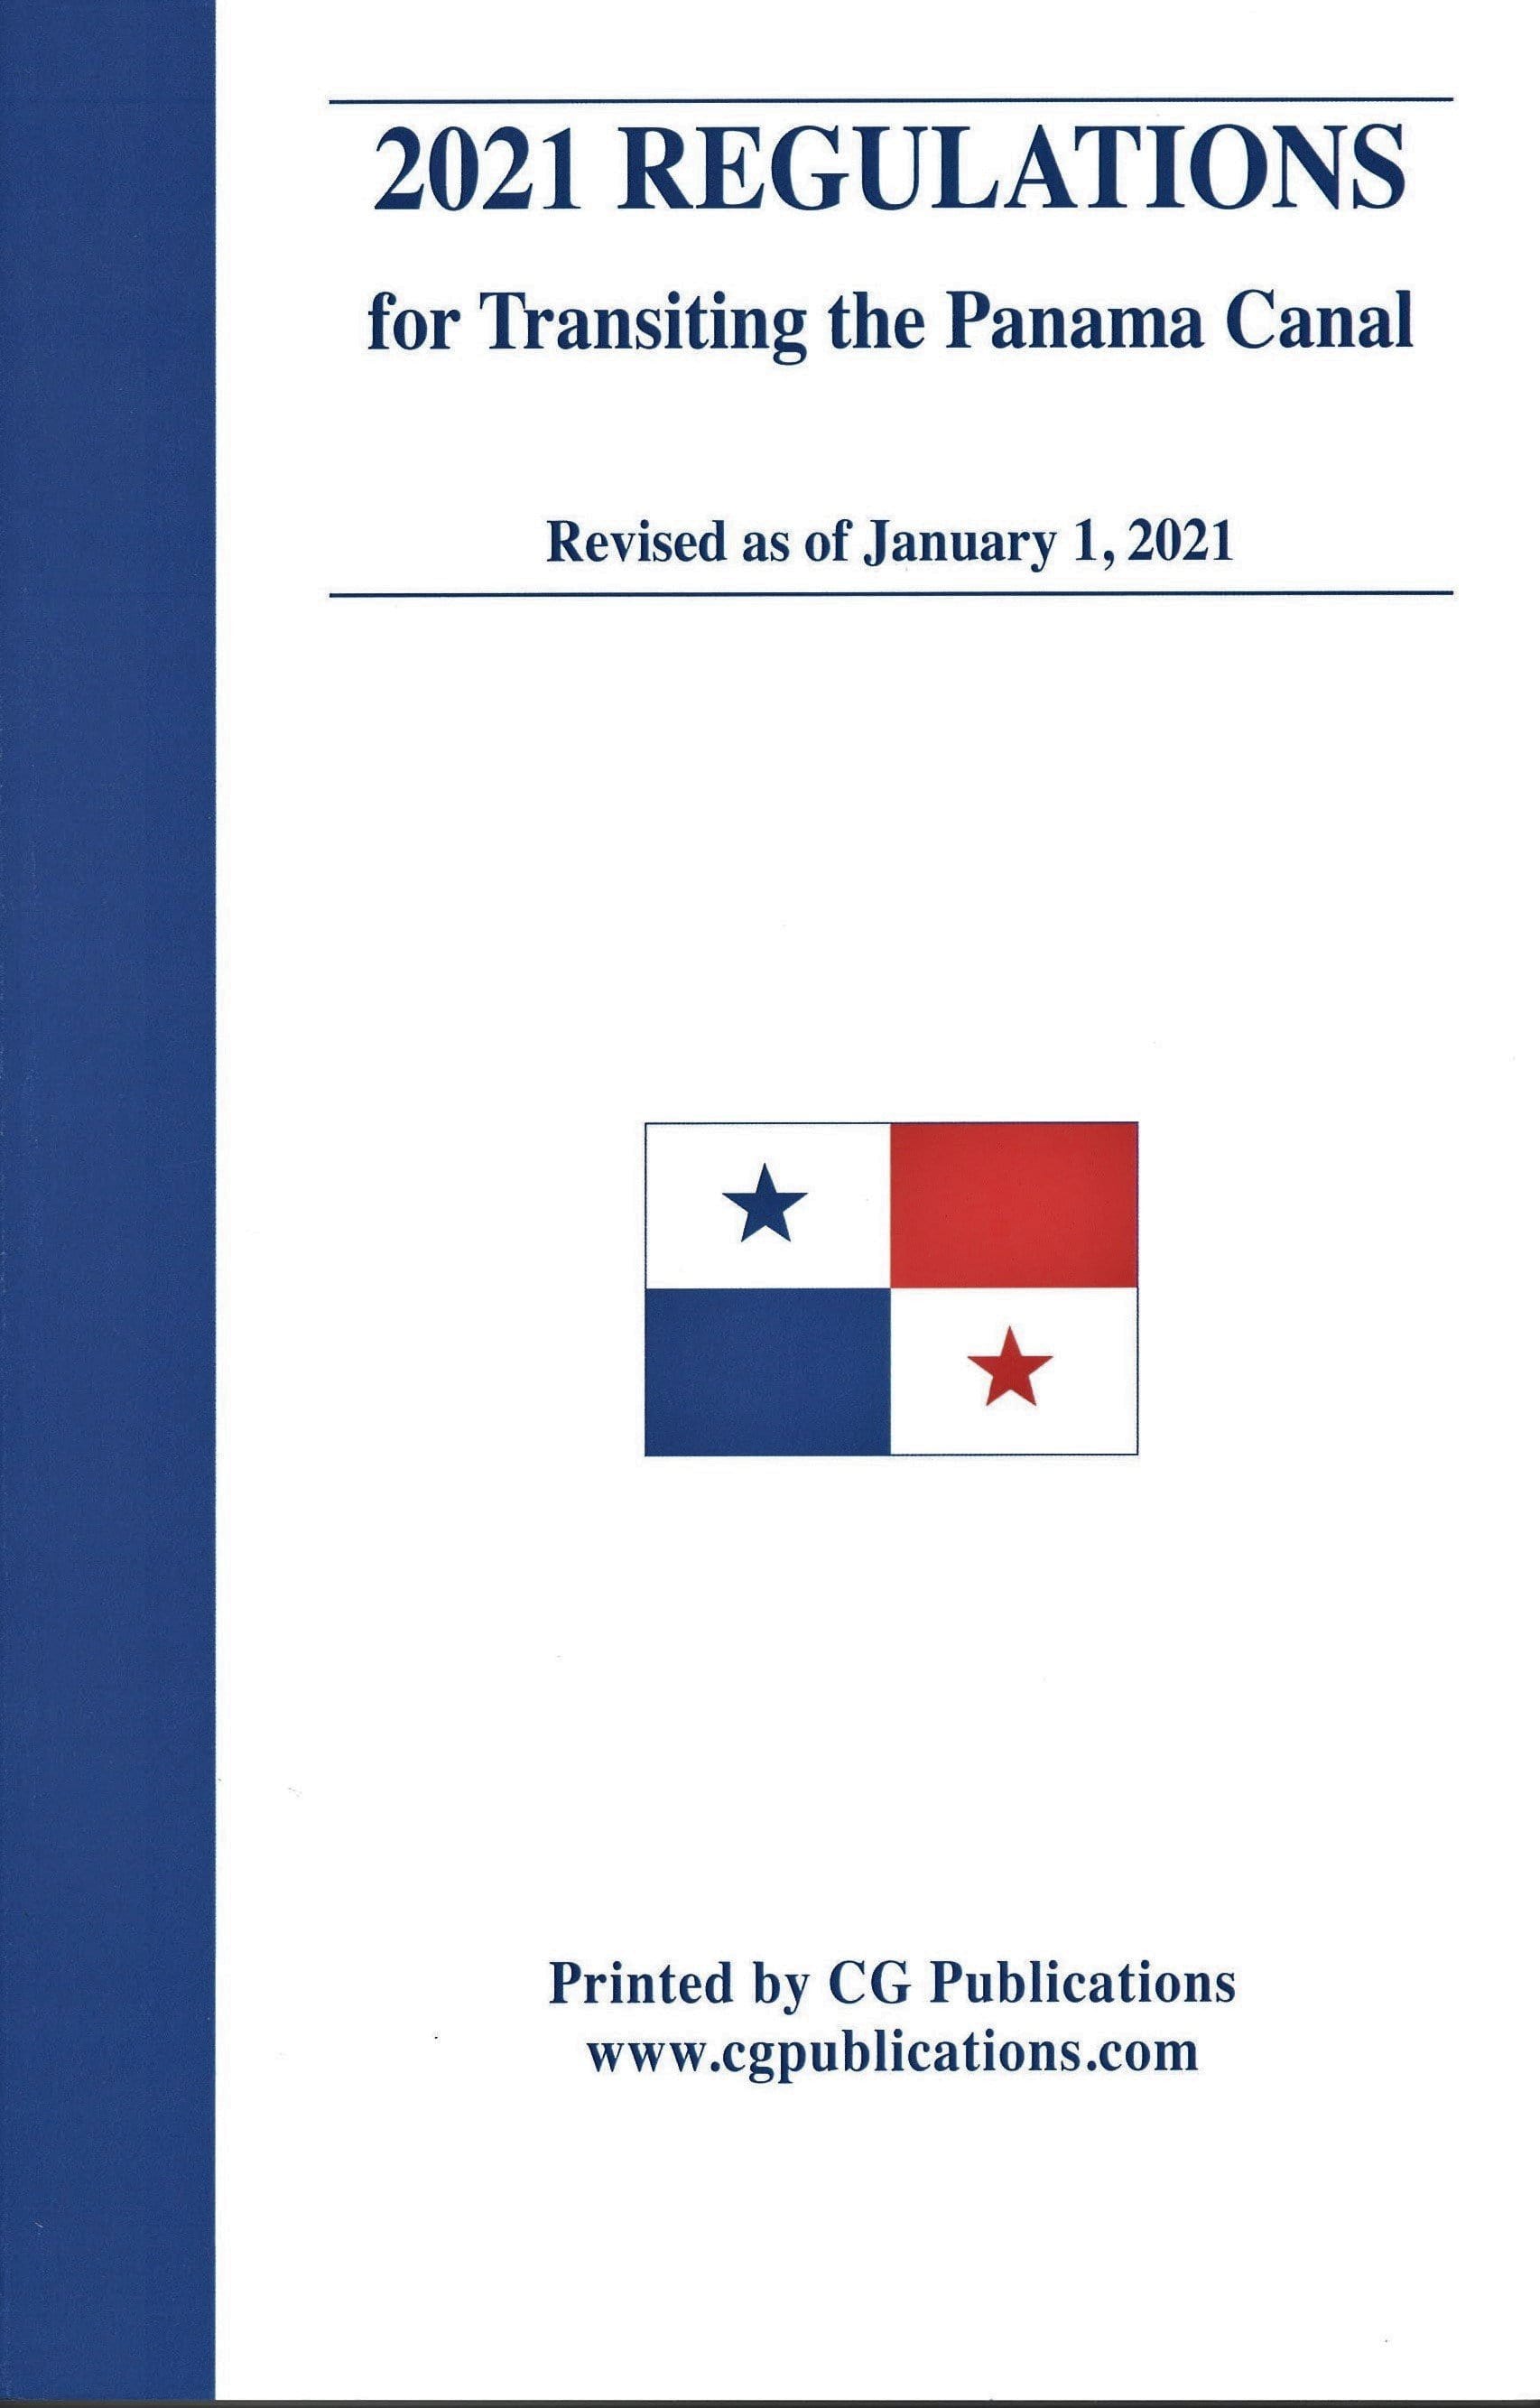 Regulations for Transiting the Panama Canal, 2021 Edition (including CD-ROM)